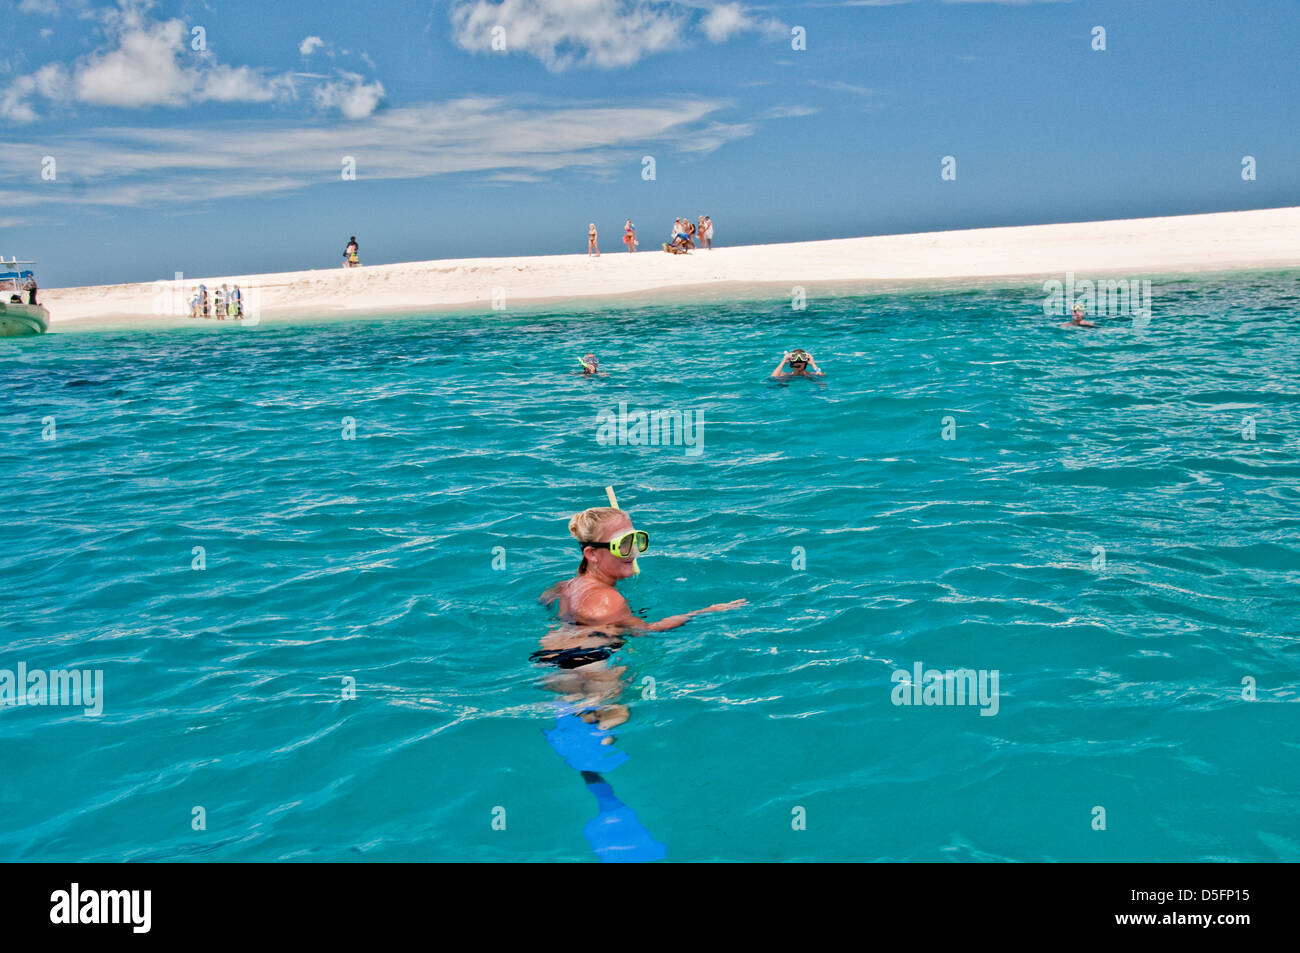 Girl snorkling near castaway island. Known from the movie Castaway with Tom Hanks, Monuriki island in the Manamuca island group. Stock Photo